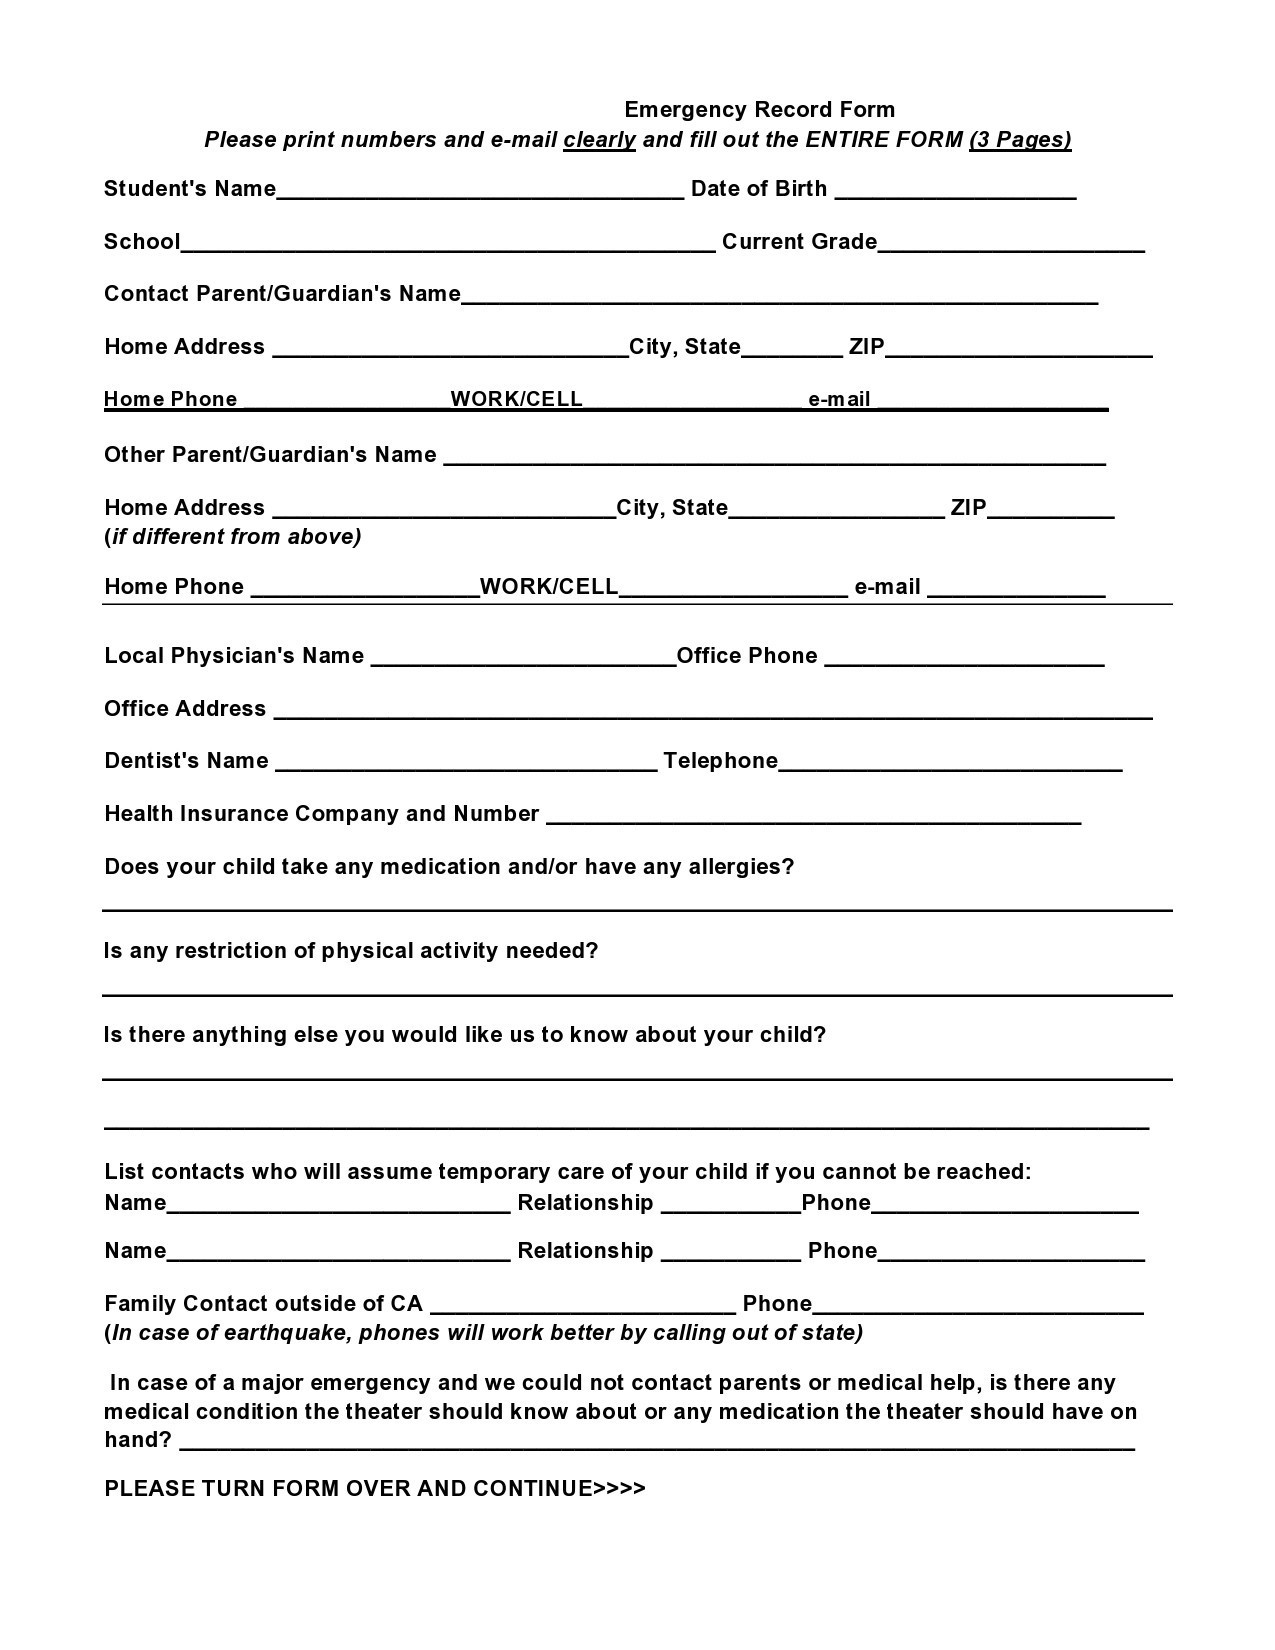 Free emergency contact form 07